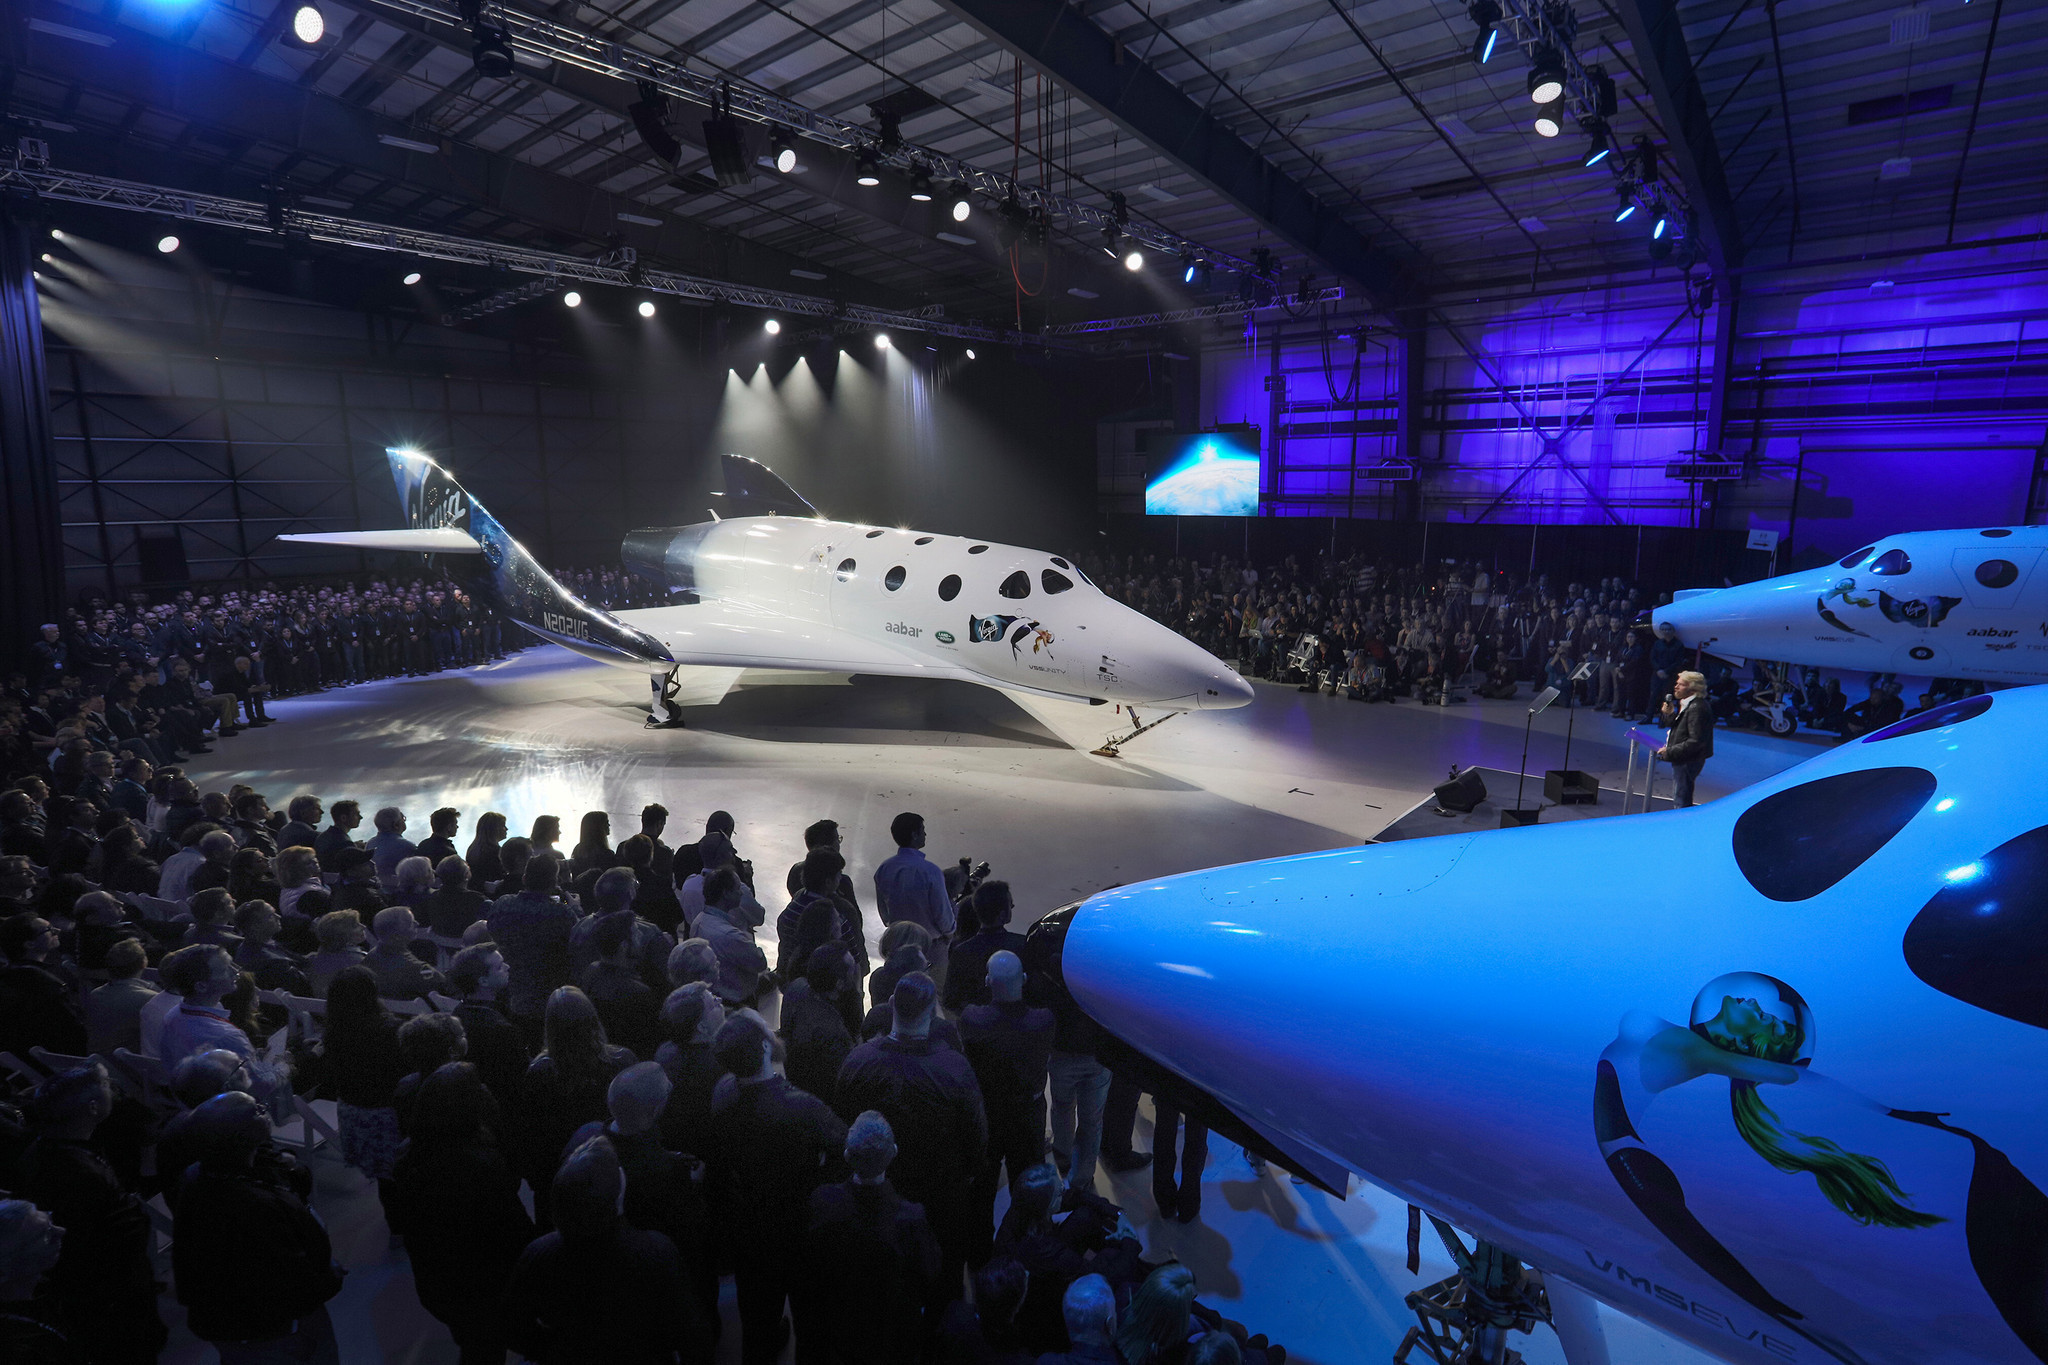 os-virgin-galactic-to-roll-out-new-space-tourism-rocket-plane-20160219